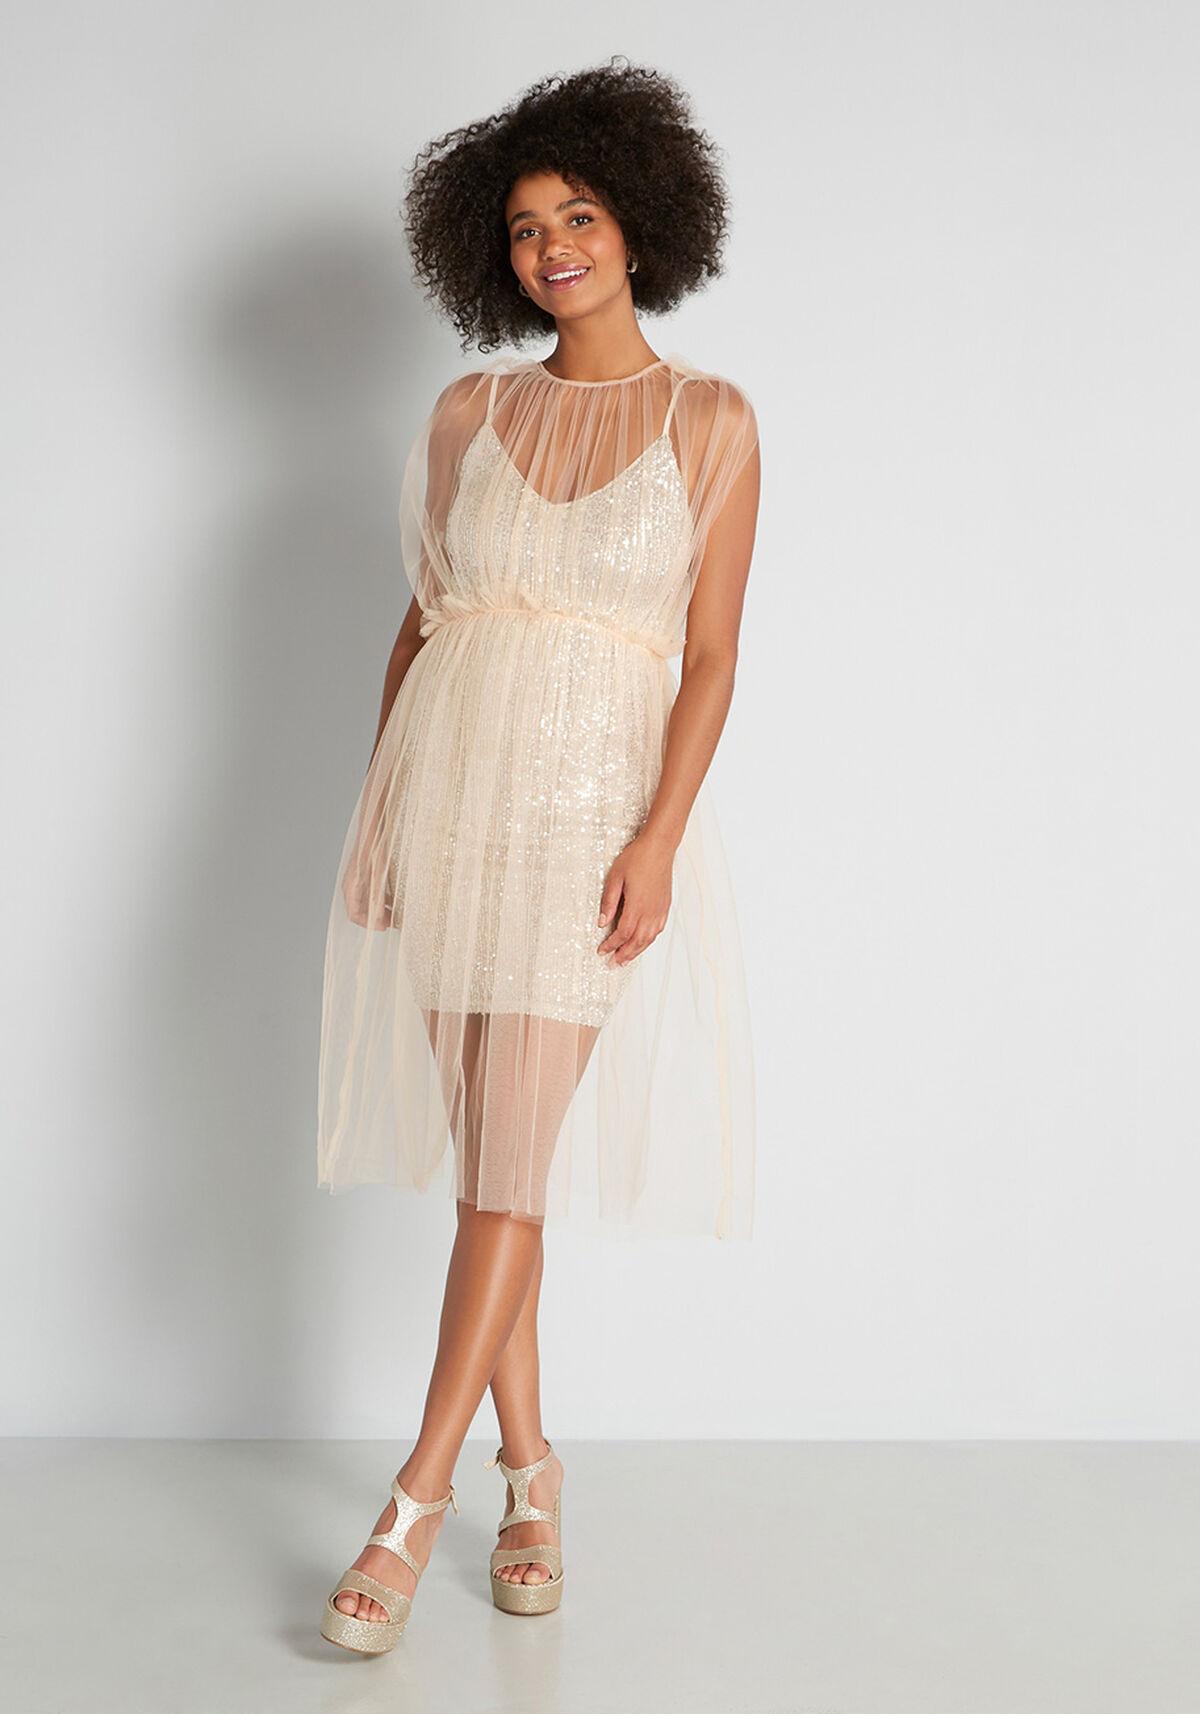 31 Rehearsal Dinner Dresses and Outfits for Trendsetting Brides